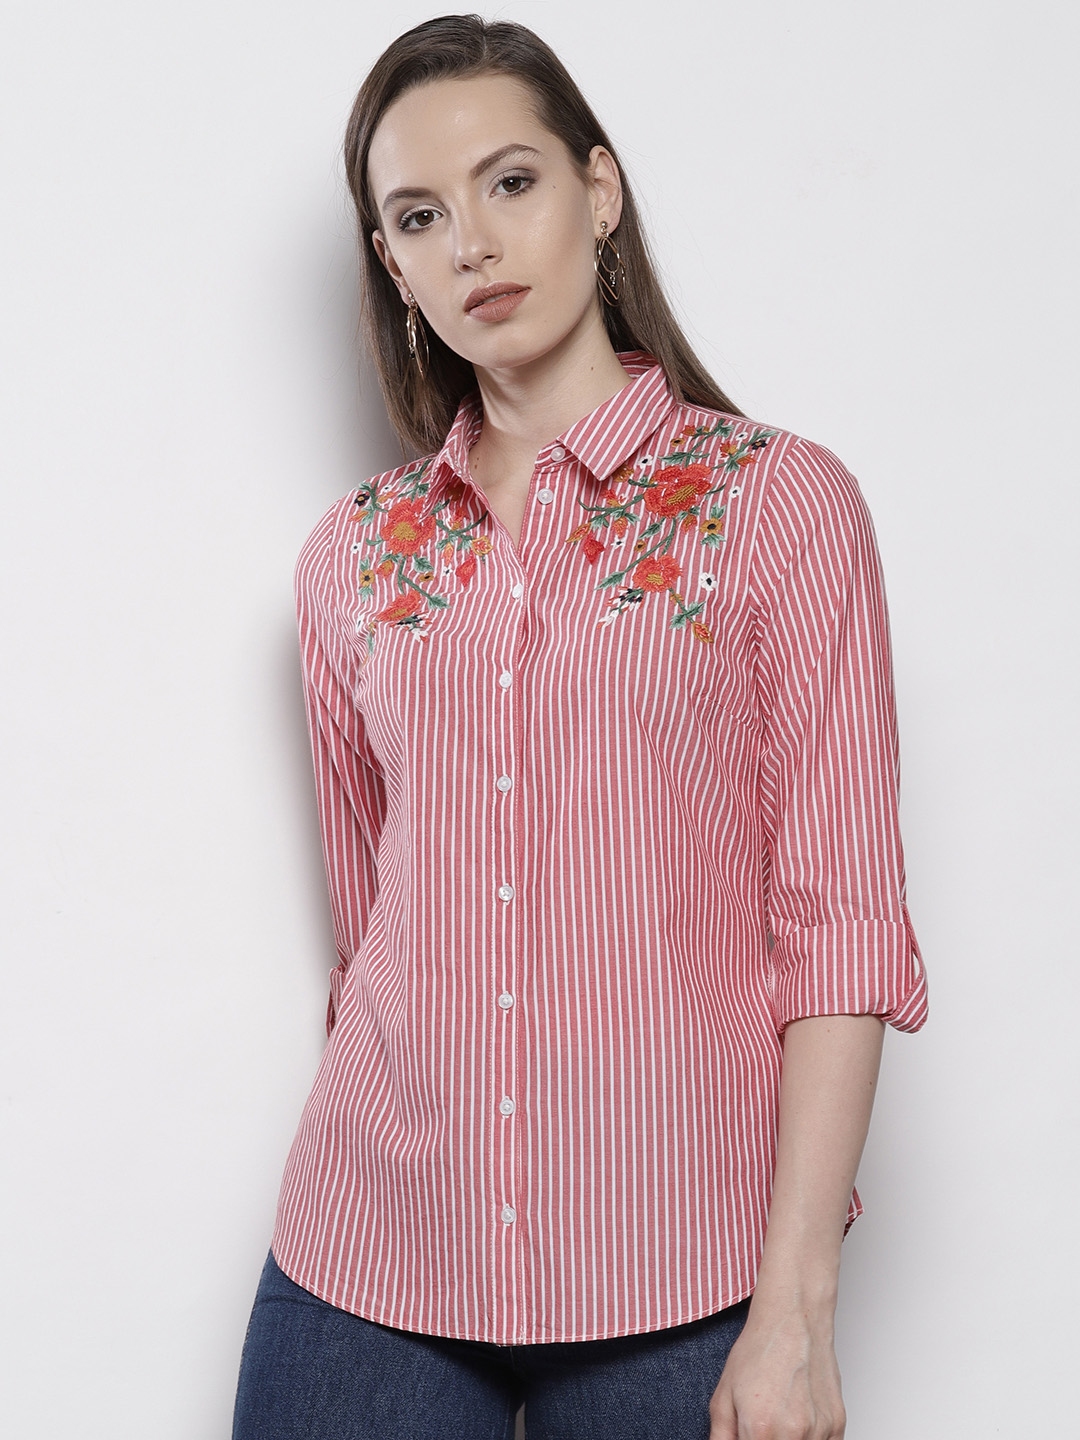 Buy DOROTHY PERKINS Women Red & White Regular Fit Striped Casual Shirt ...